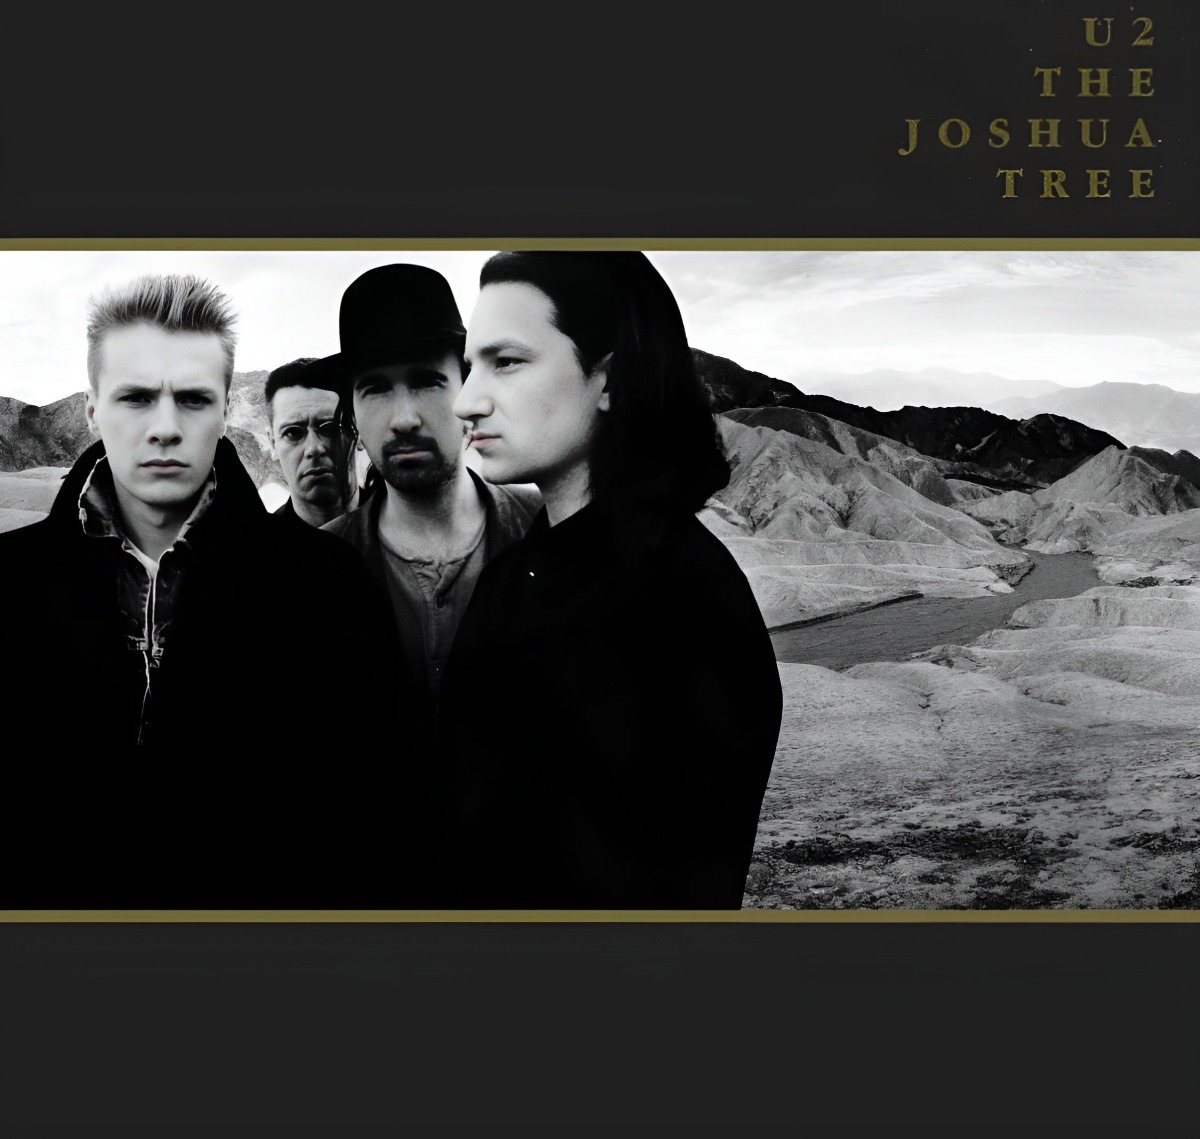 Cover of "The Joshua Tree" by U2